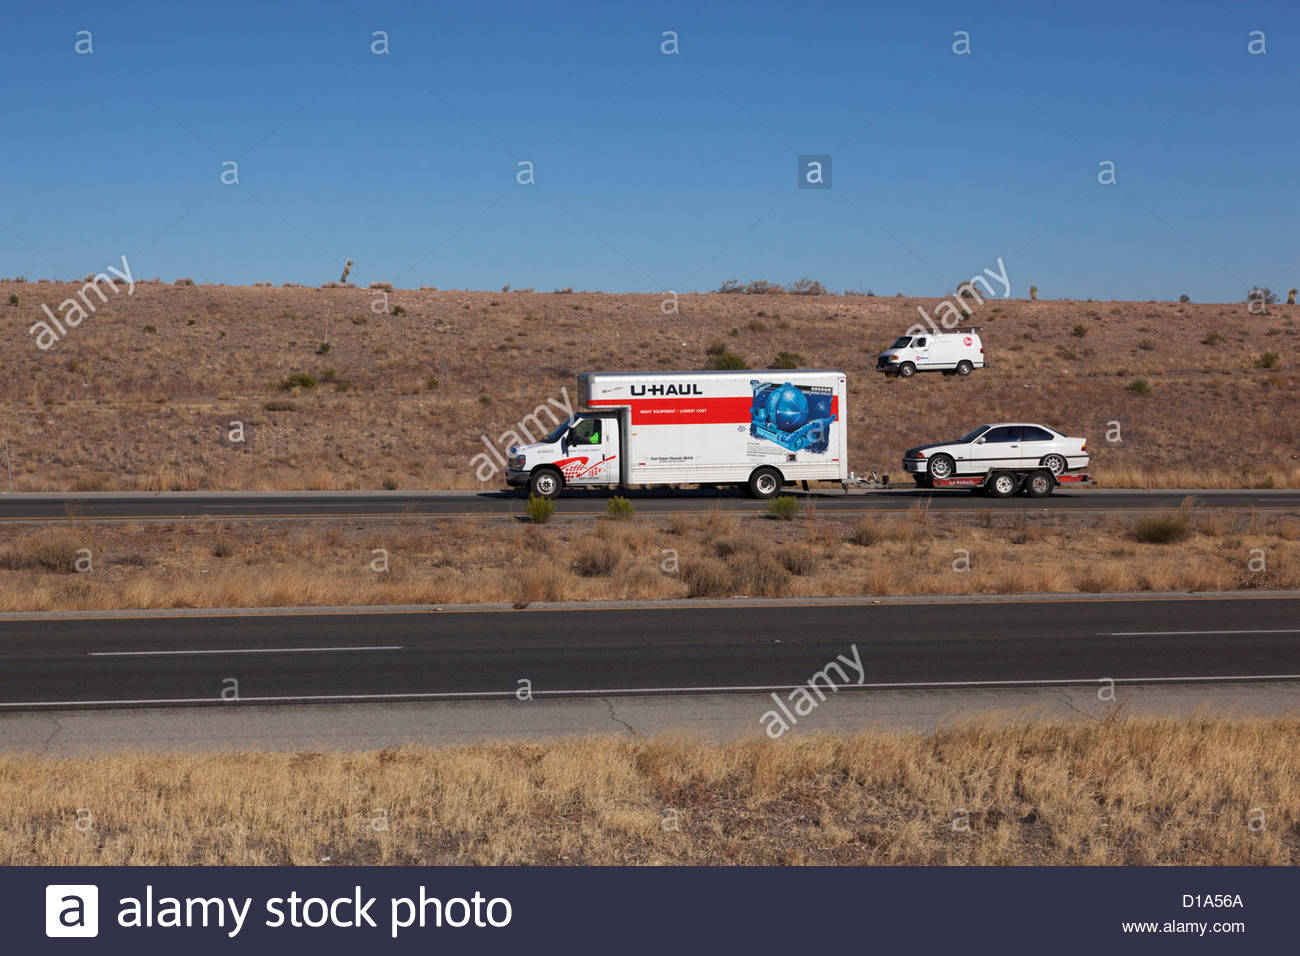 u-haul-truck-pulling-trailer-with-car-arizona-2-drivers-visible-D1A56A.jpg